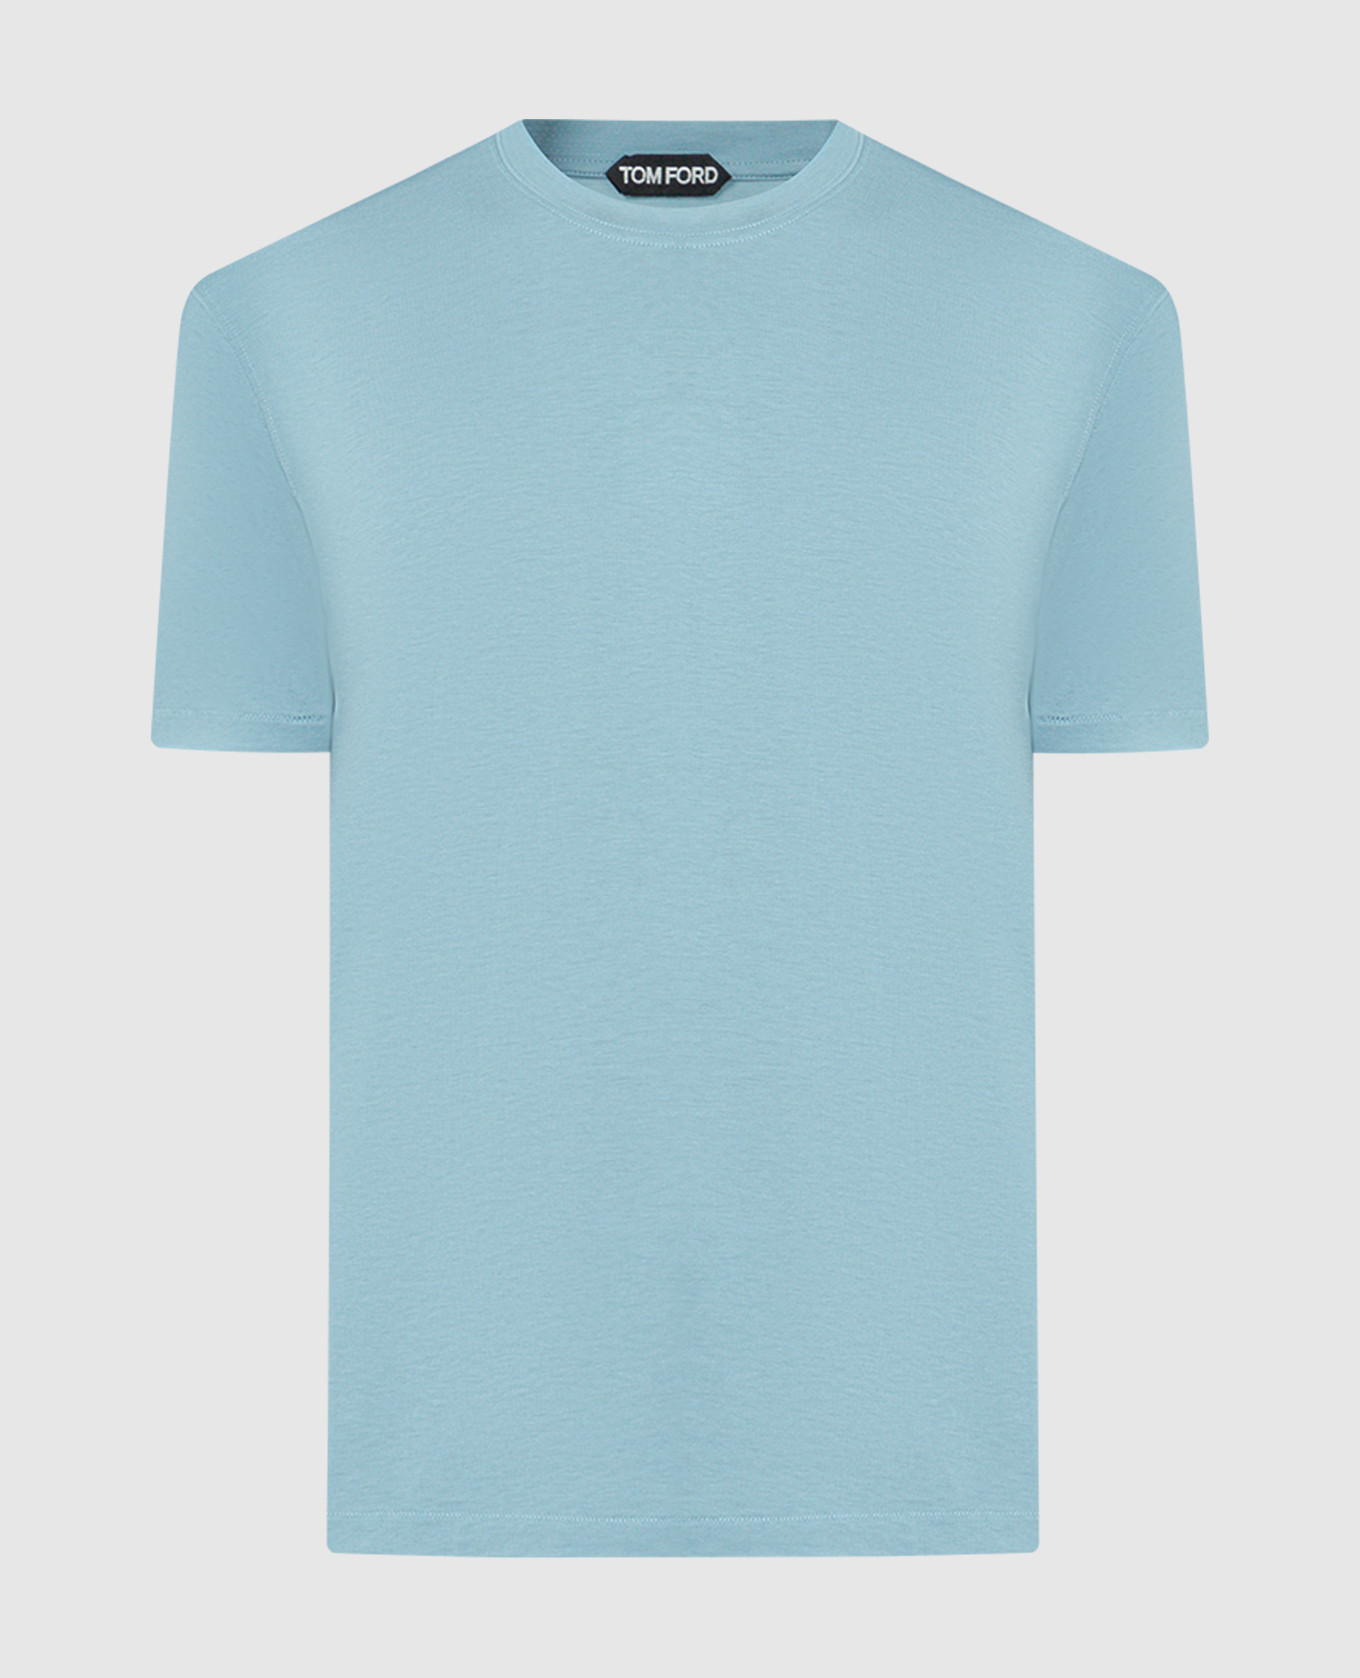 Blue t-shirt with monogram embroidery